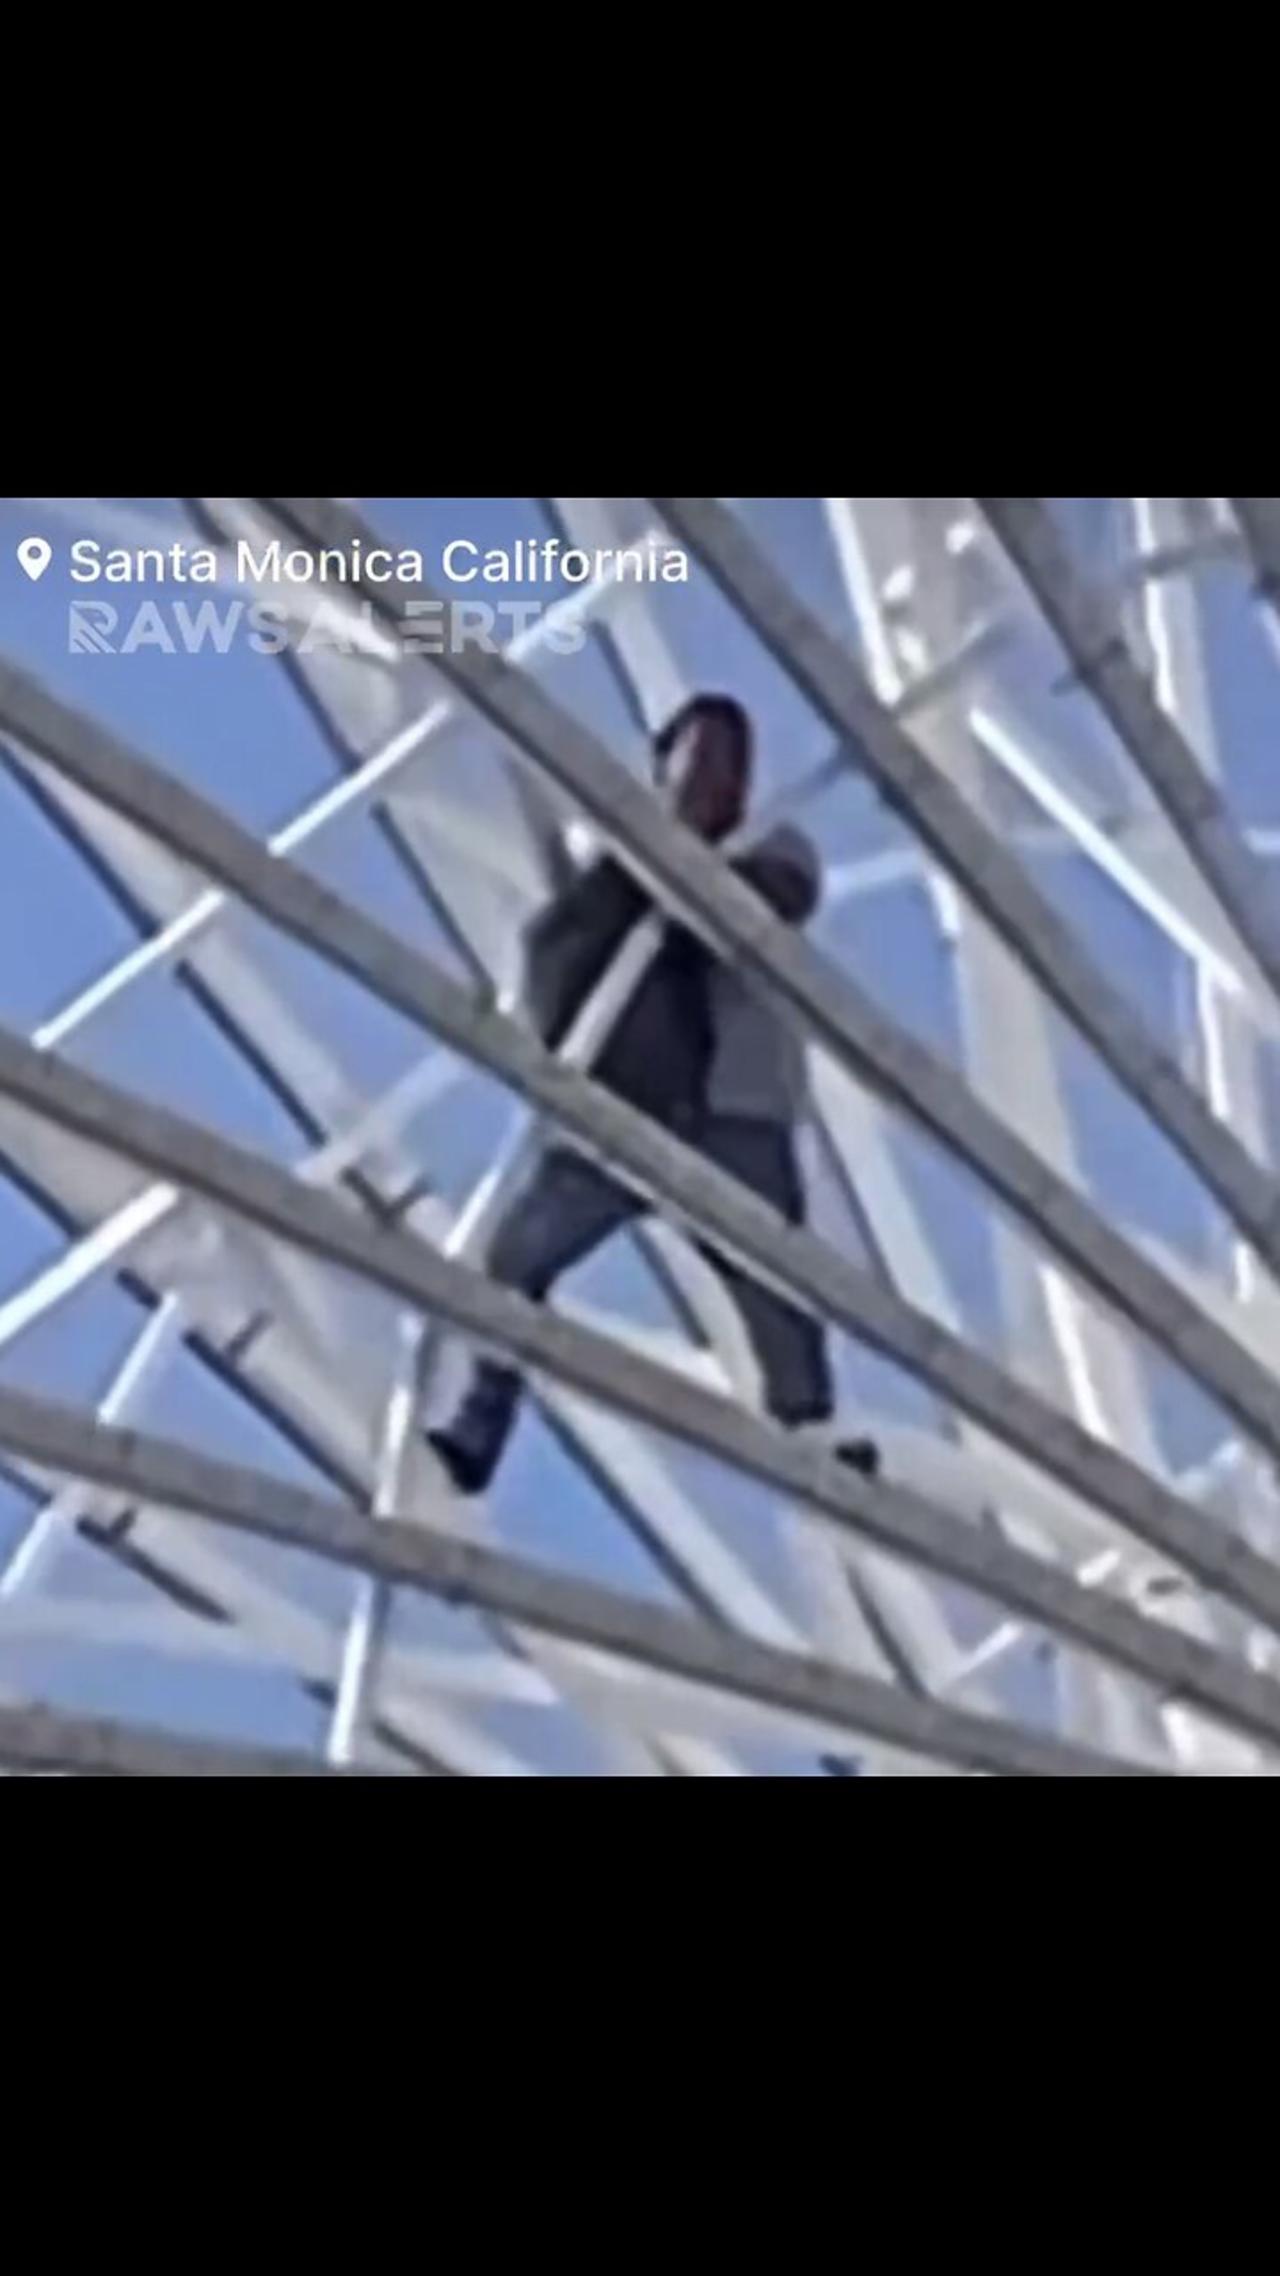 **BREAKING** Man on Ferris wheel in Santa Monica claims to have a bomb